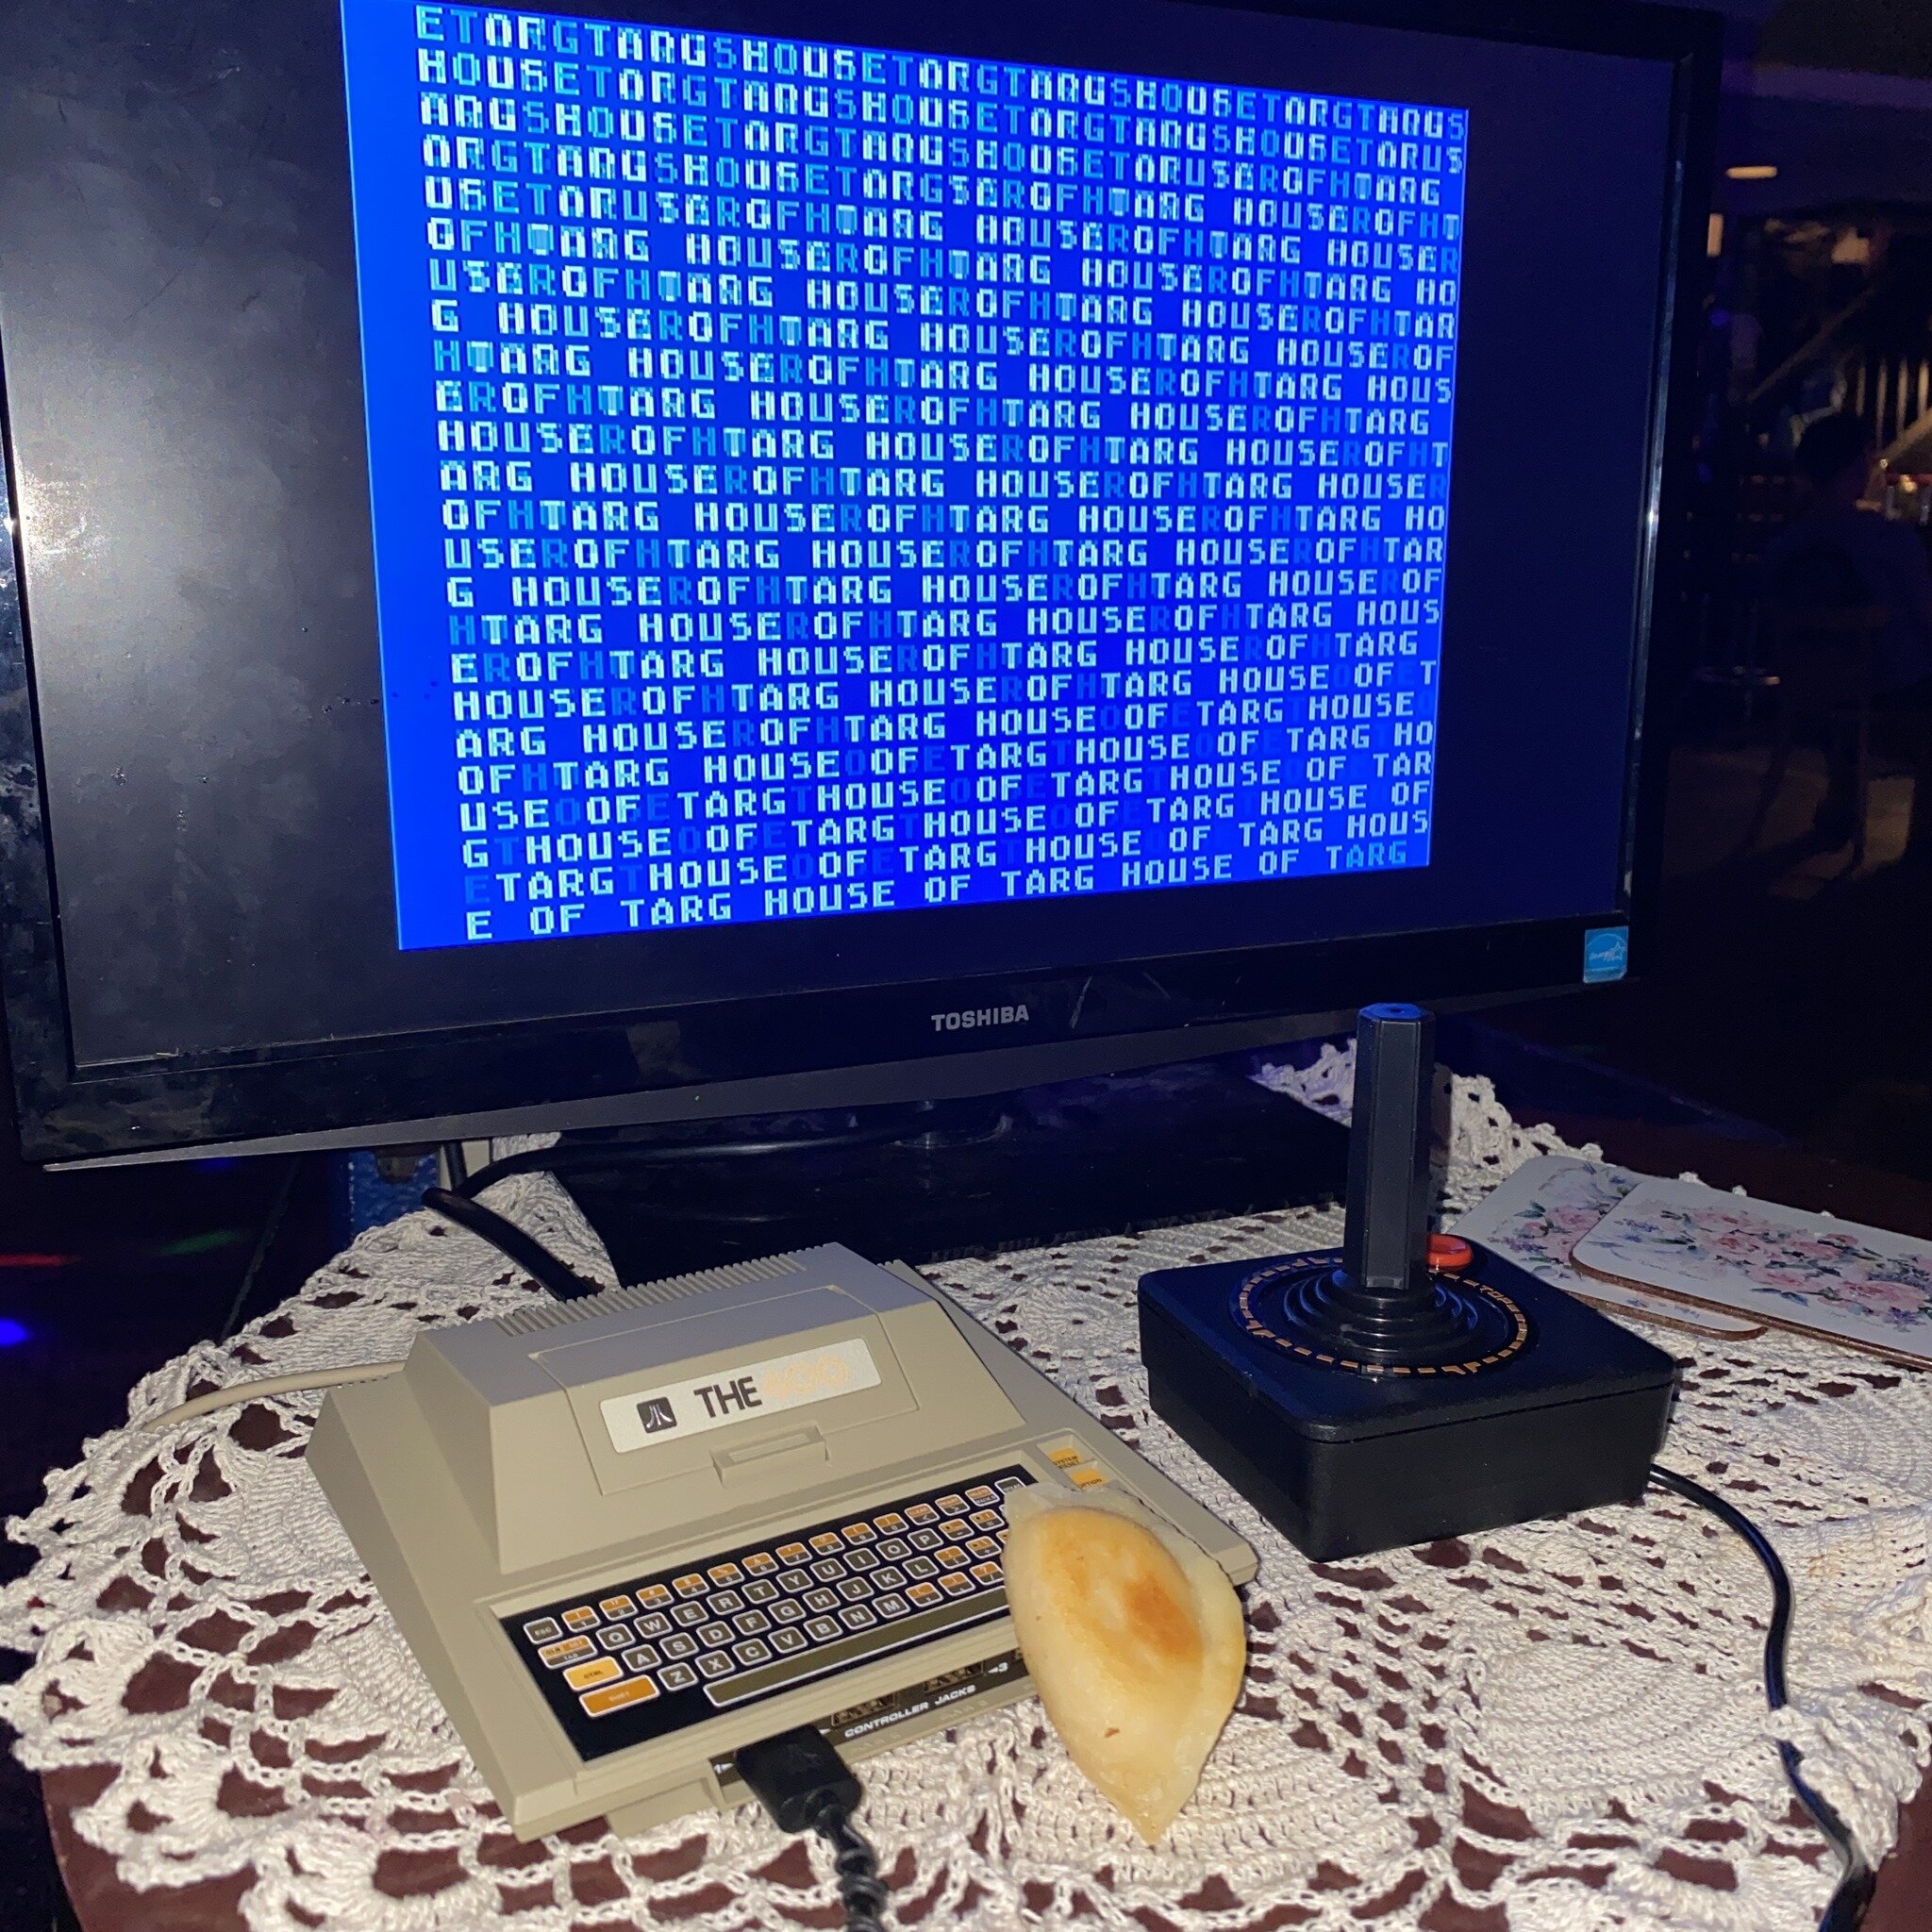 Come on down for some FREE-PLAY: After Dark w/ DJ bRAD &amp; check out our new ATARI 400 mini for some 8-bit computer gaming action or breakout your best Basic programming skillz. *Perogi for scale. Also - THE STICKER PIT has been loaded up with new 